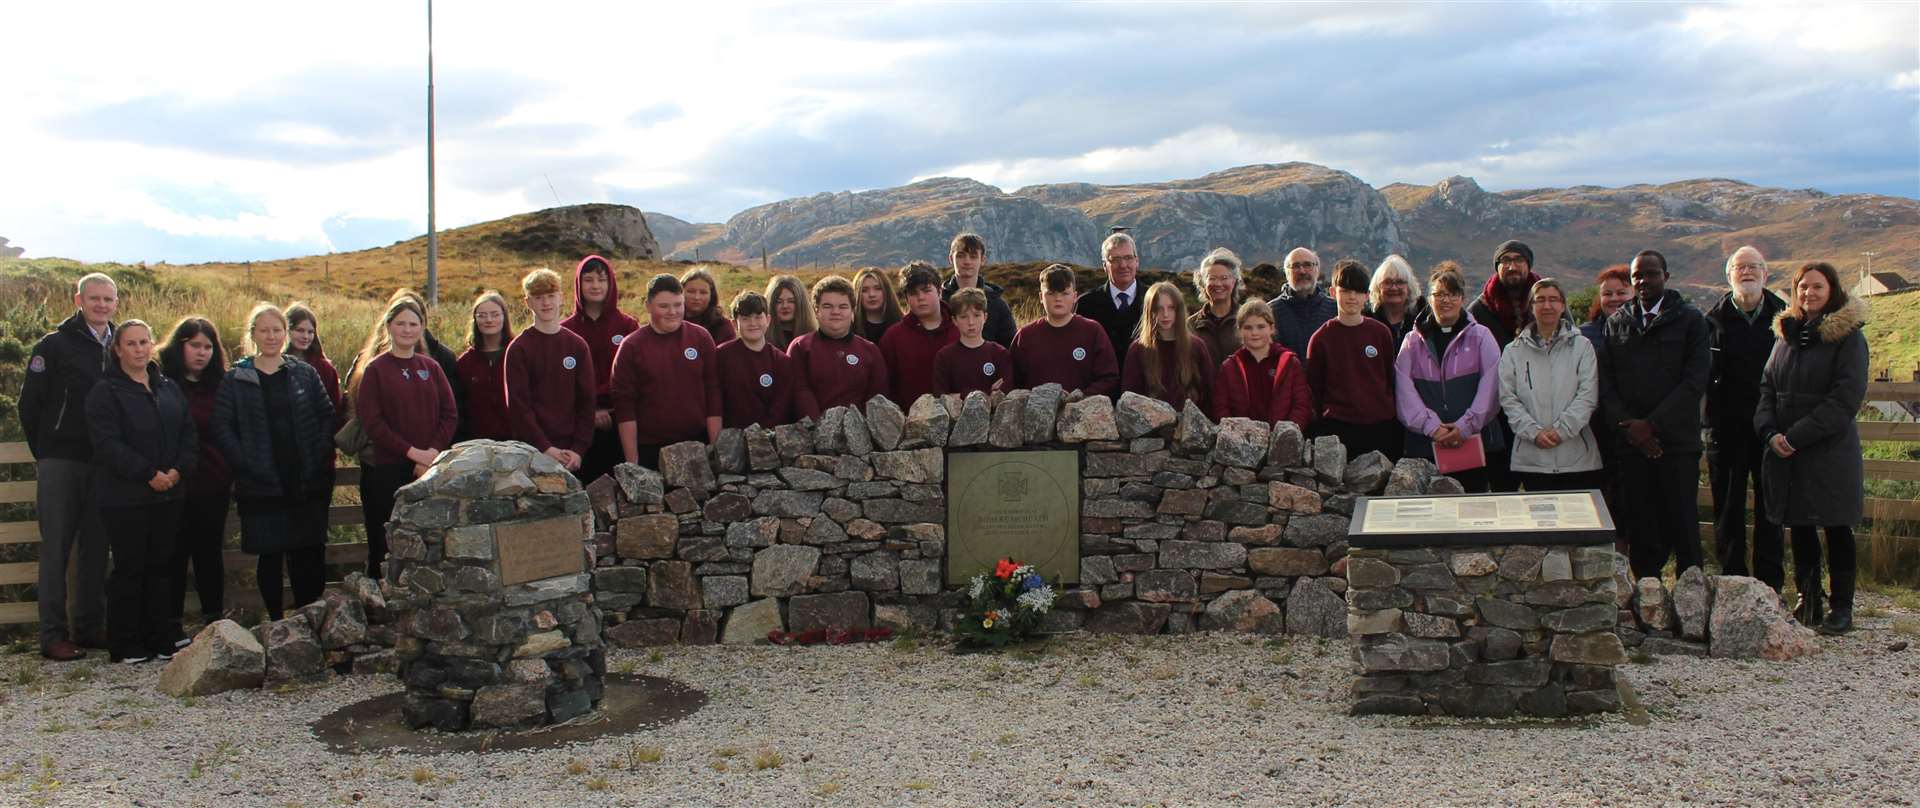 Kinlochbervie High School marked the centenary of the death of World War I Victoria Cross (VC) recipient Robert McBeath at a ceremony at the McBeath Memorial today.